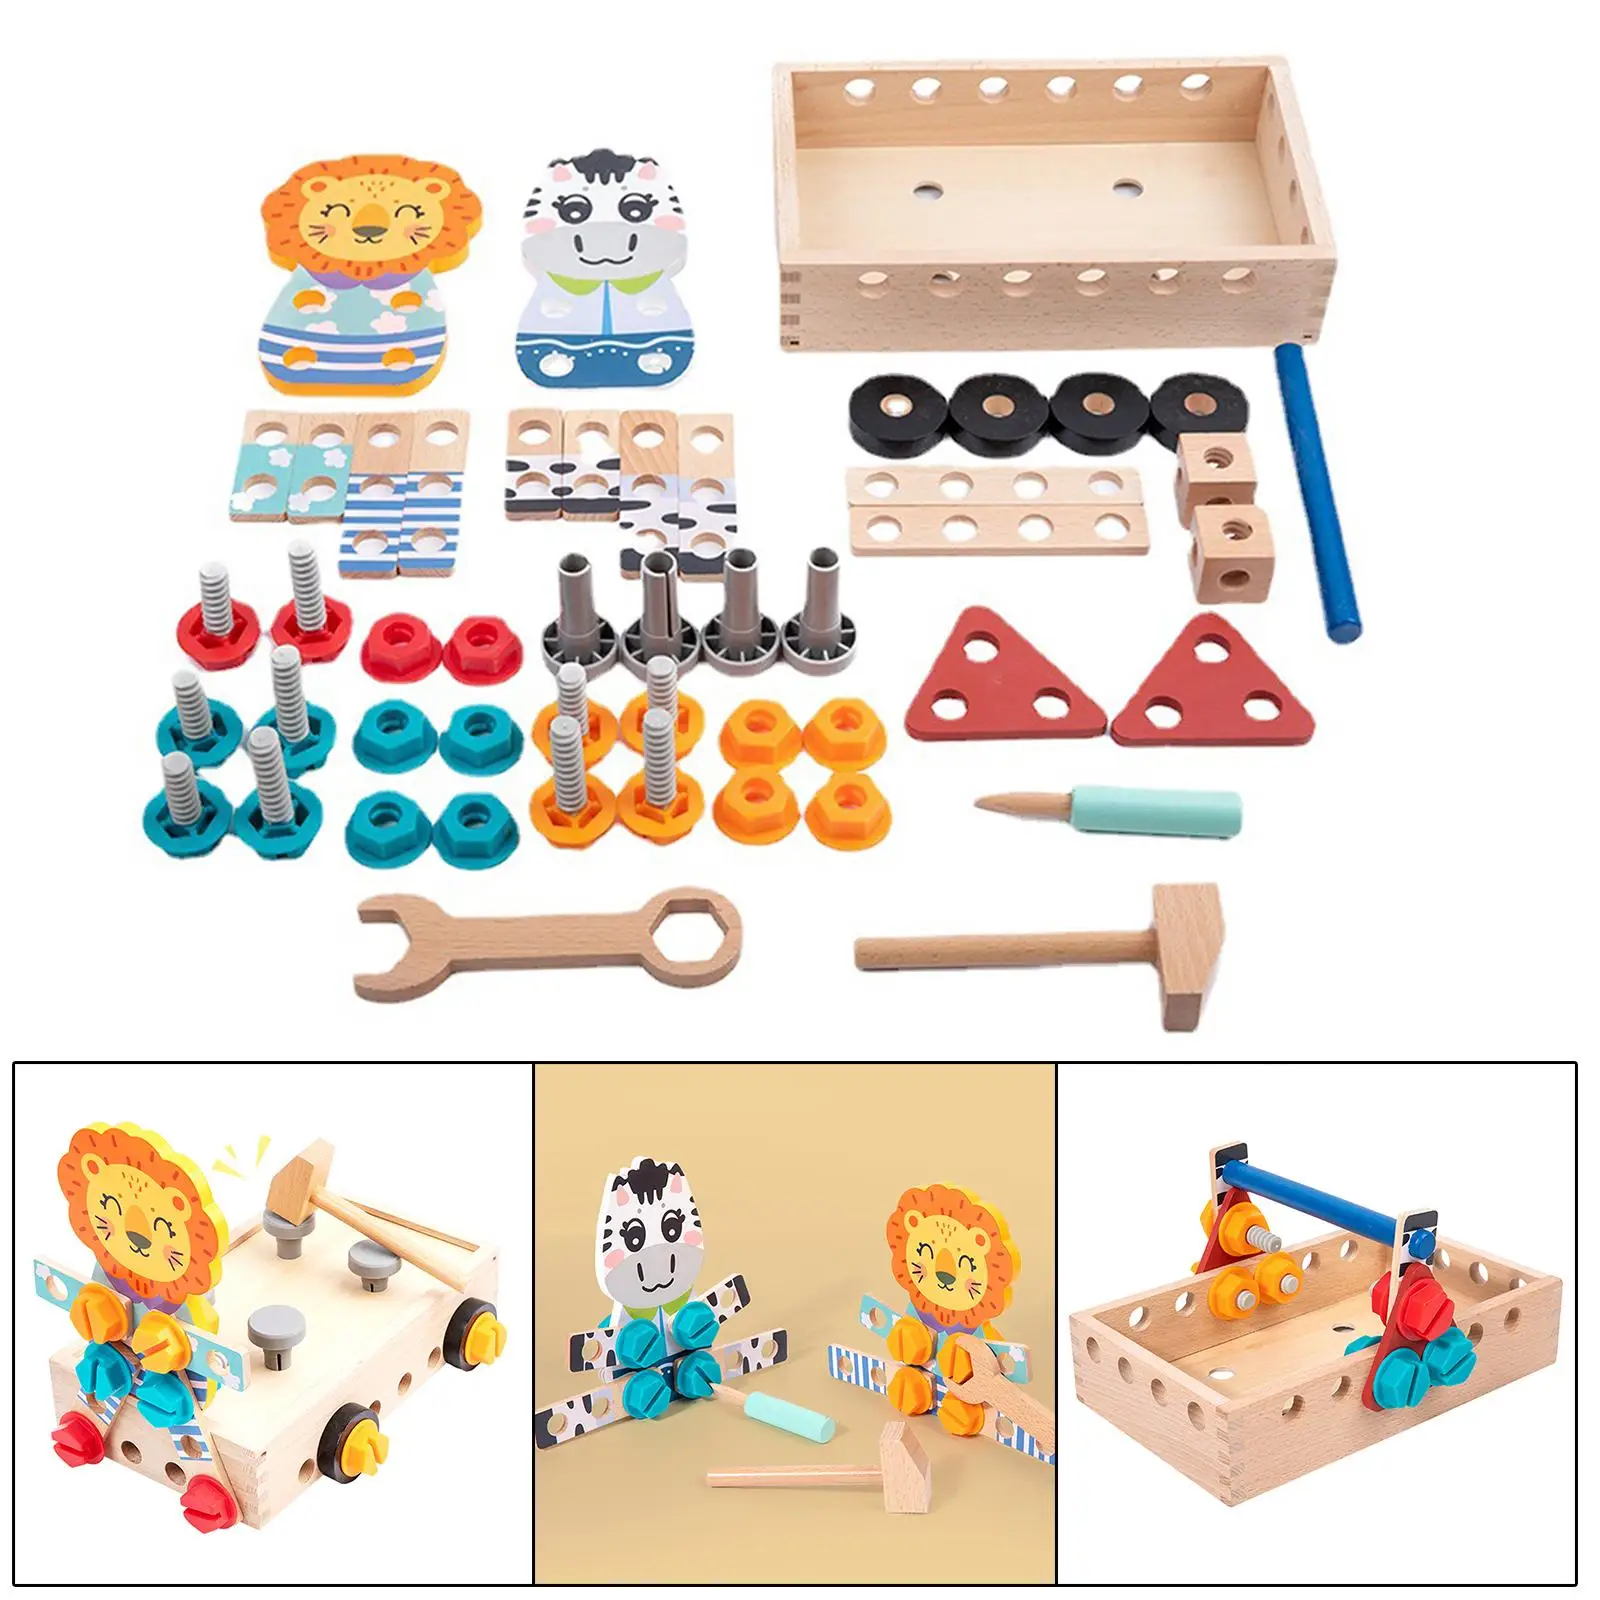 Toddler Tool Set DIY Construction Toy for Education Learning Education